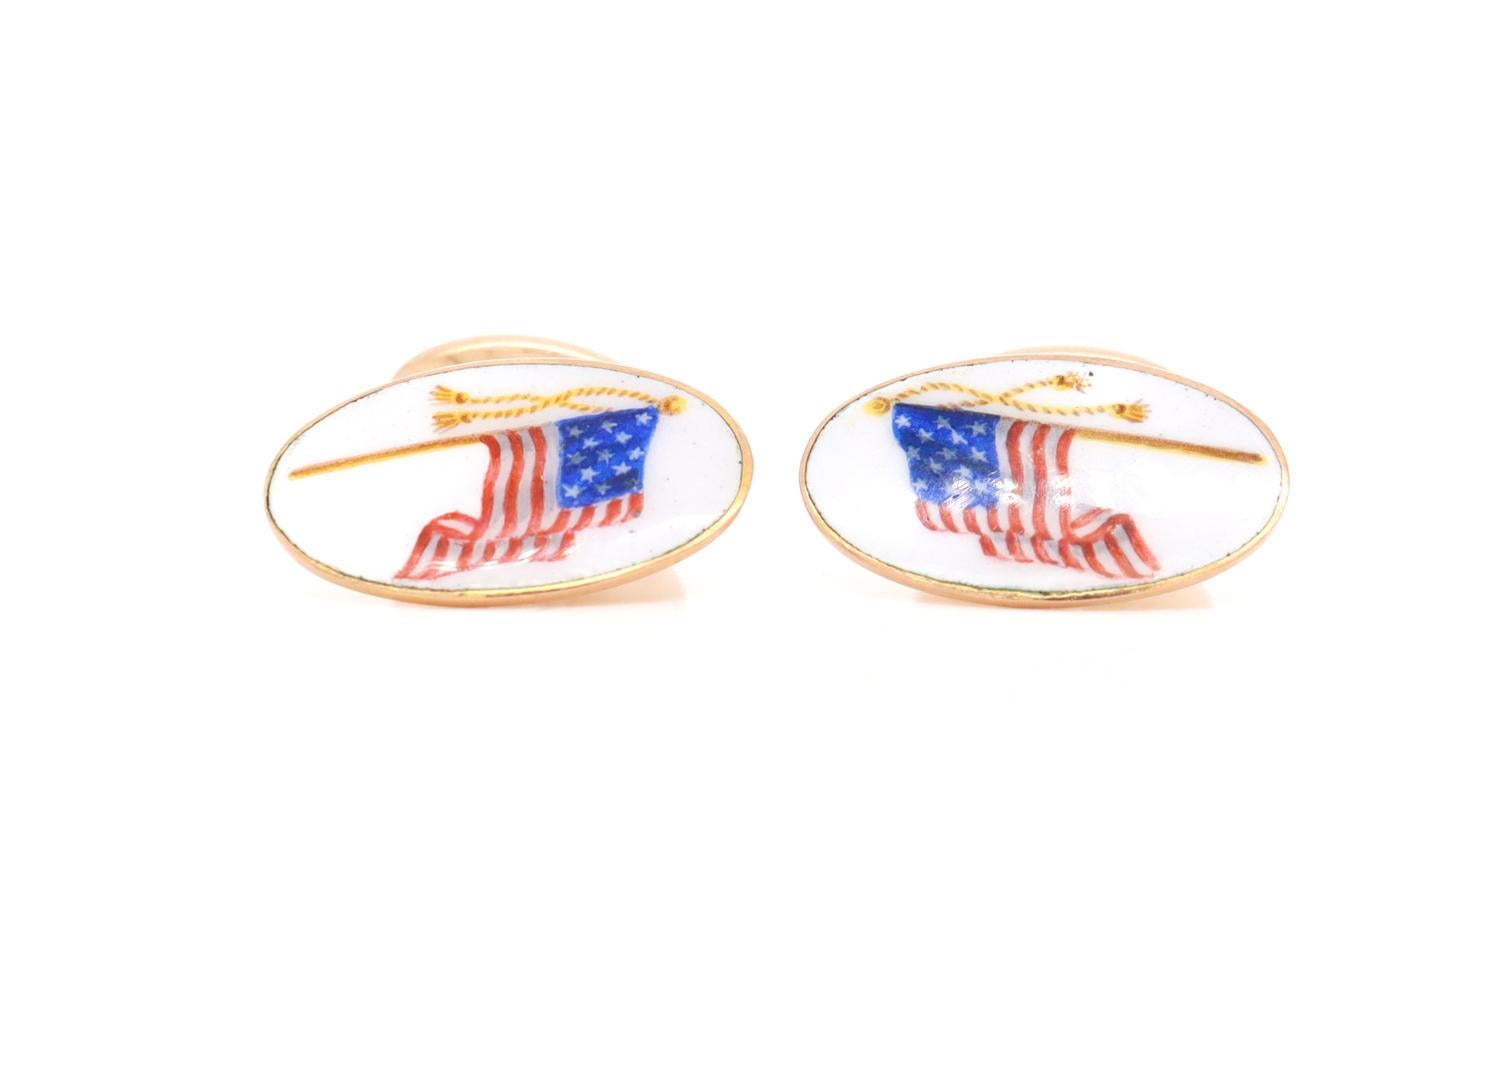 Antique Day, Clark & Co. 14k Gold & Enamel American Flag Patriotic Cufflinks In Good Condition For Sale In Philadelphia, PA